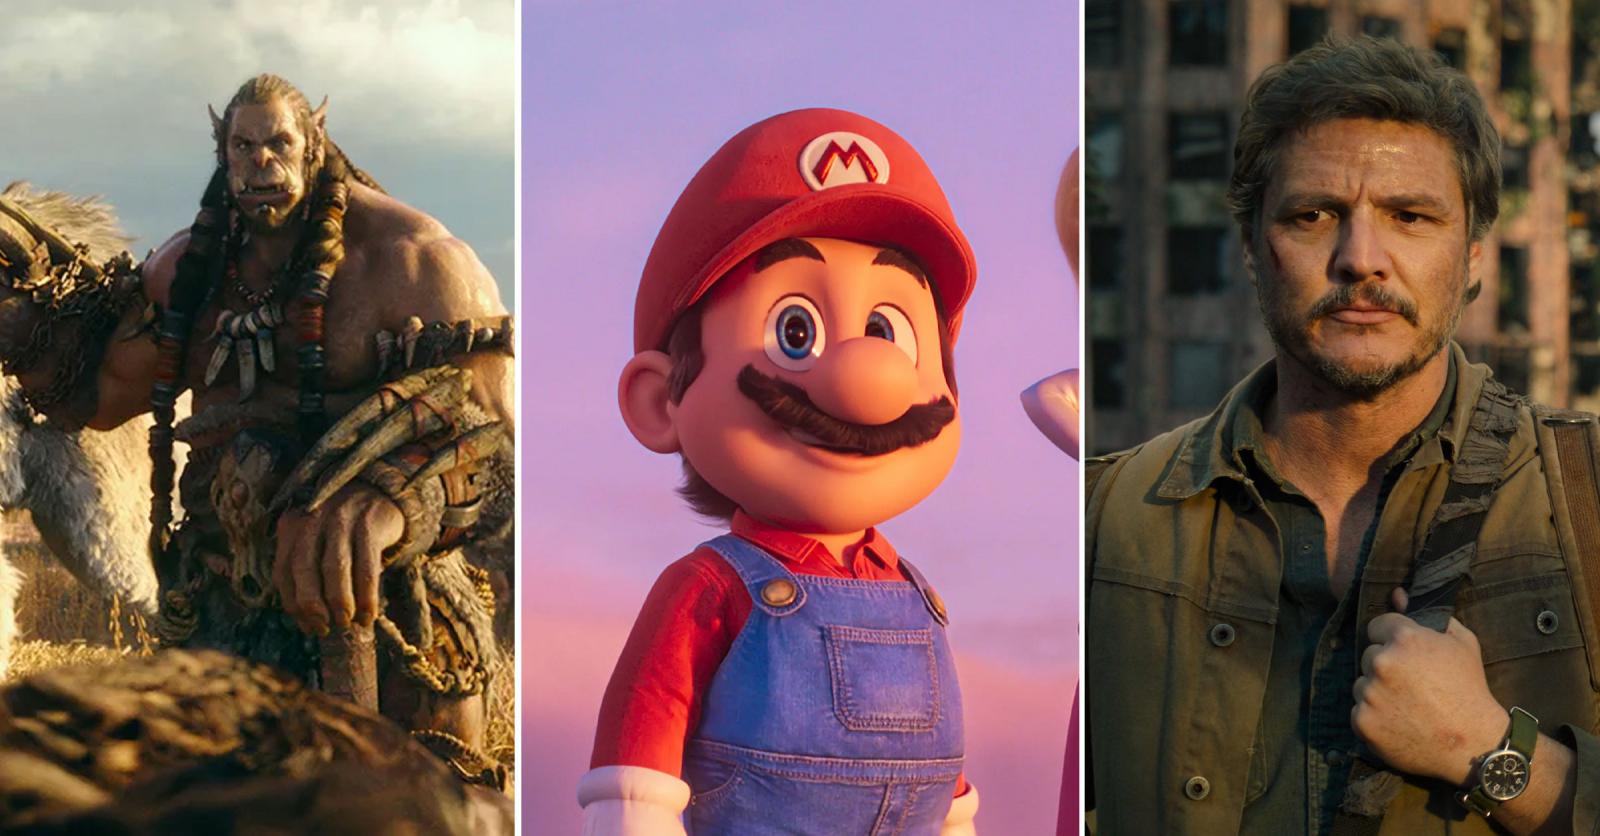 15 series and movies based on video games